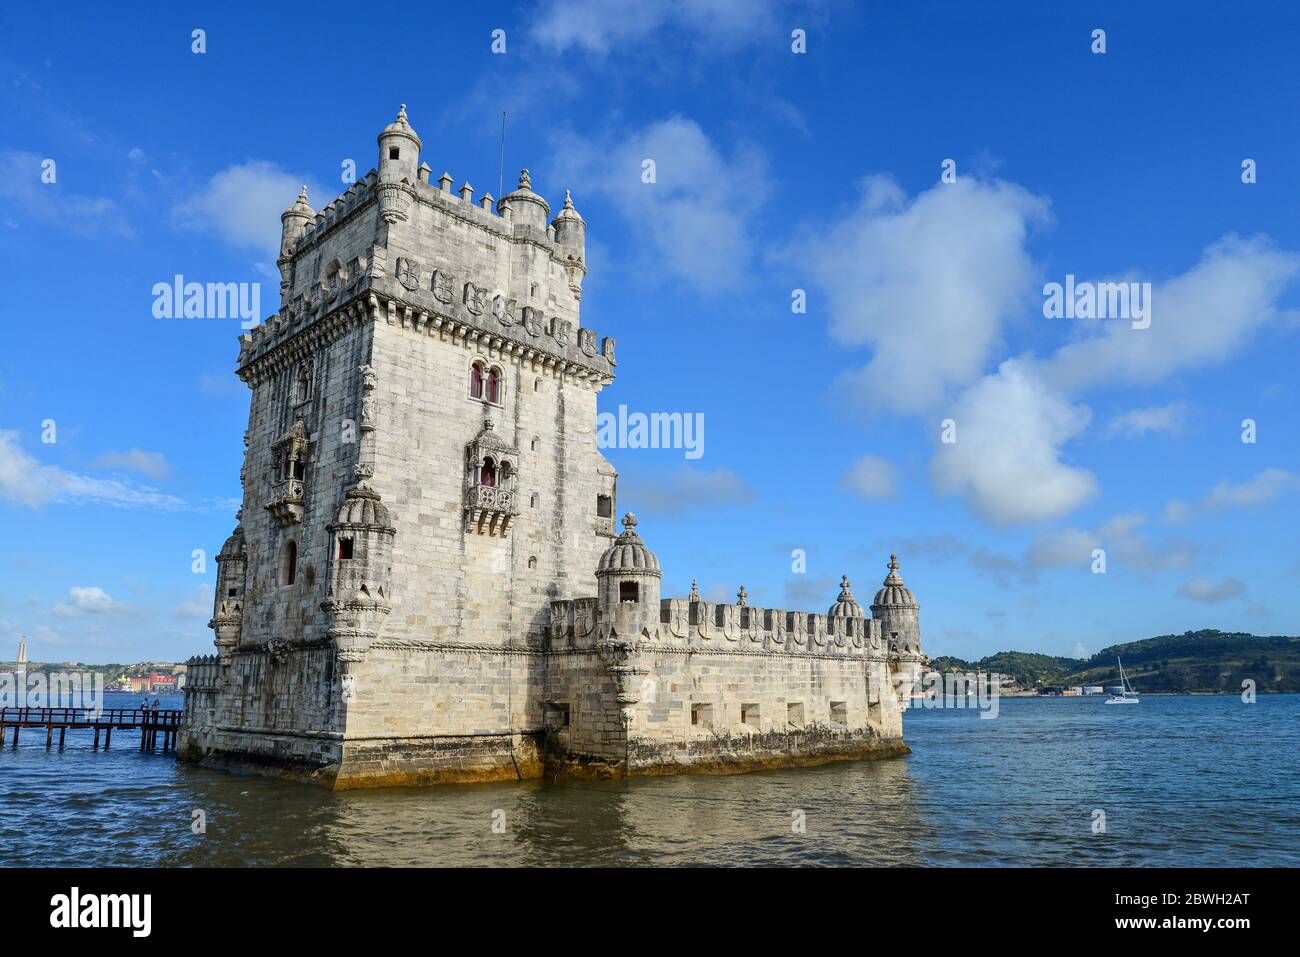 View at the Belem tower or Torre de Belem of Portuguese Manueline style on the northern bank of the Tagus River in Lisbon, Portugal Stock Photo